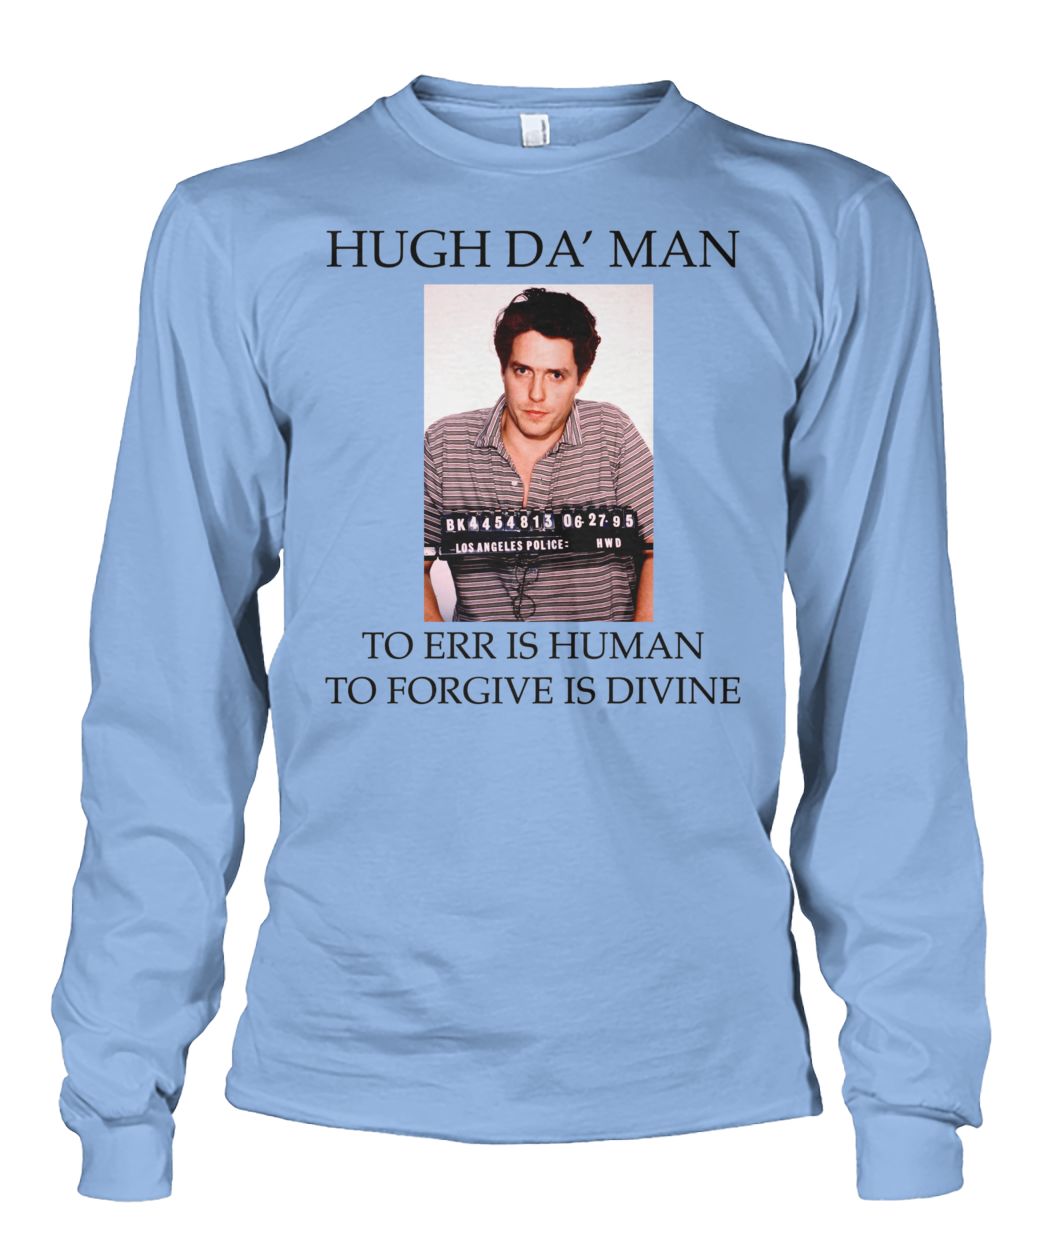 Hugh da' man to err is human to fogive is divine unisex long sleeve